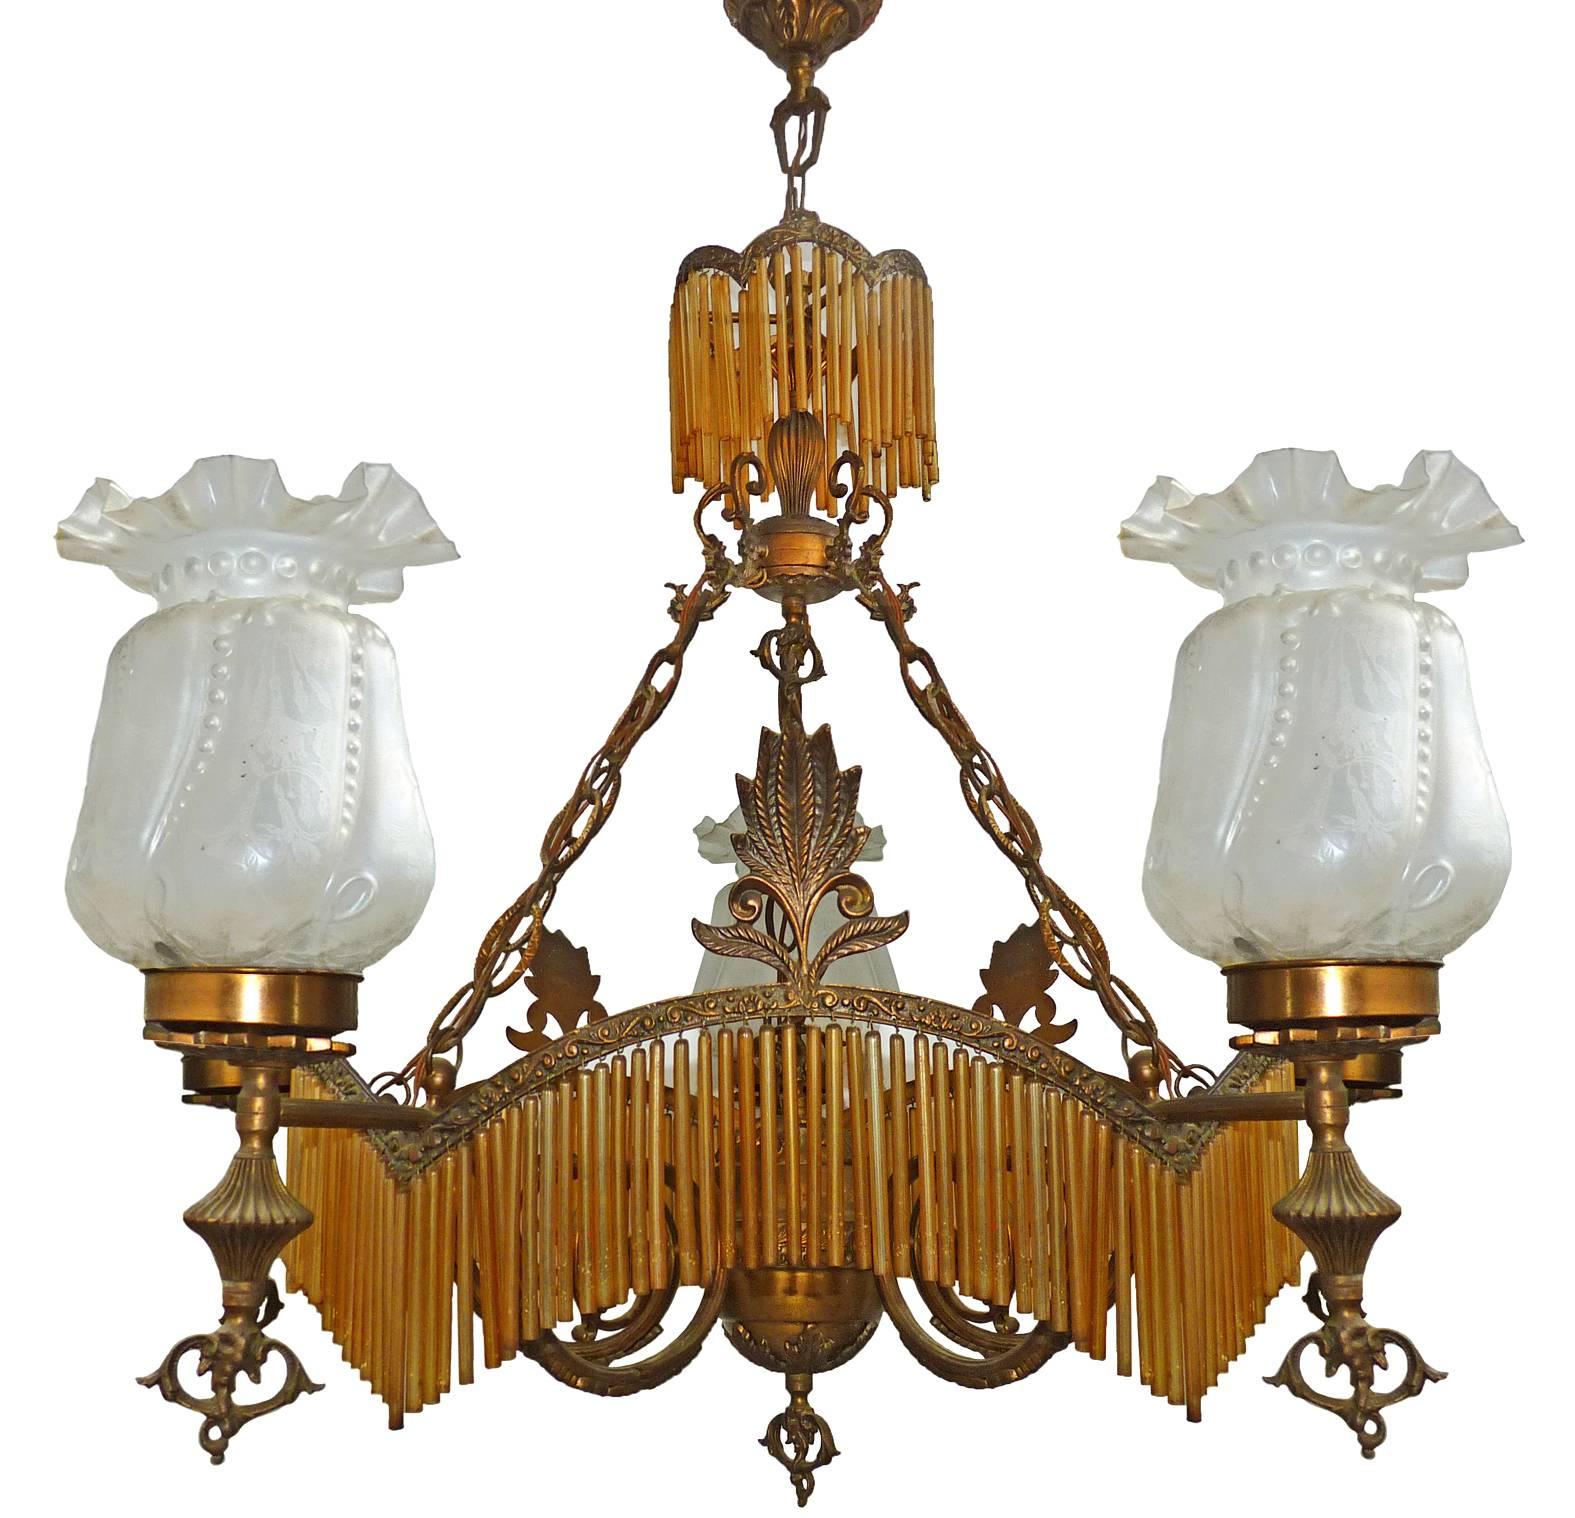 Gorgeous antique French chandelier in amber glass tubes, Art Deco / Art Nouveau 
Measures: 
Diameter 36 in / 90 cm
Height 40 in / 100 cm 
Glass shades: 6.3 in (16 cm) / 8.3 in (21 cm)
Five light bulbs E 14/ good working condition.
Weight: 30 lb. (14